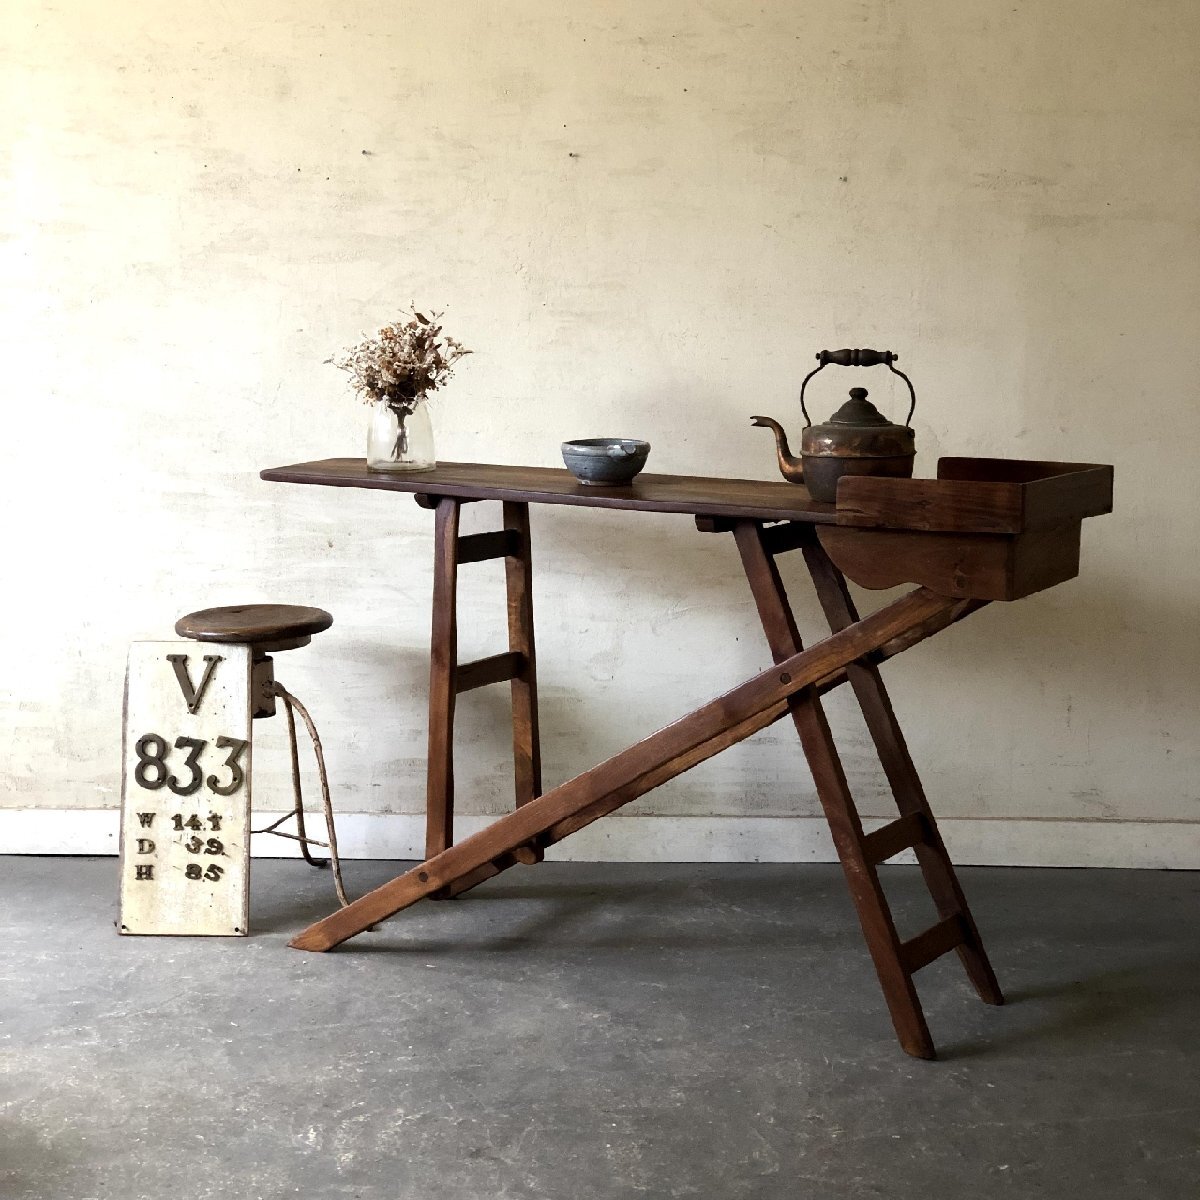 V-833* antique iron stand old cheeks material. ironing board folding type wooden Vintage display stand store furniture stk